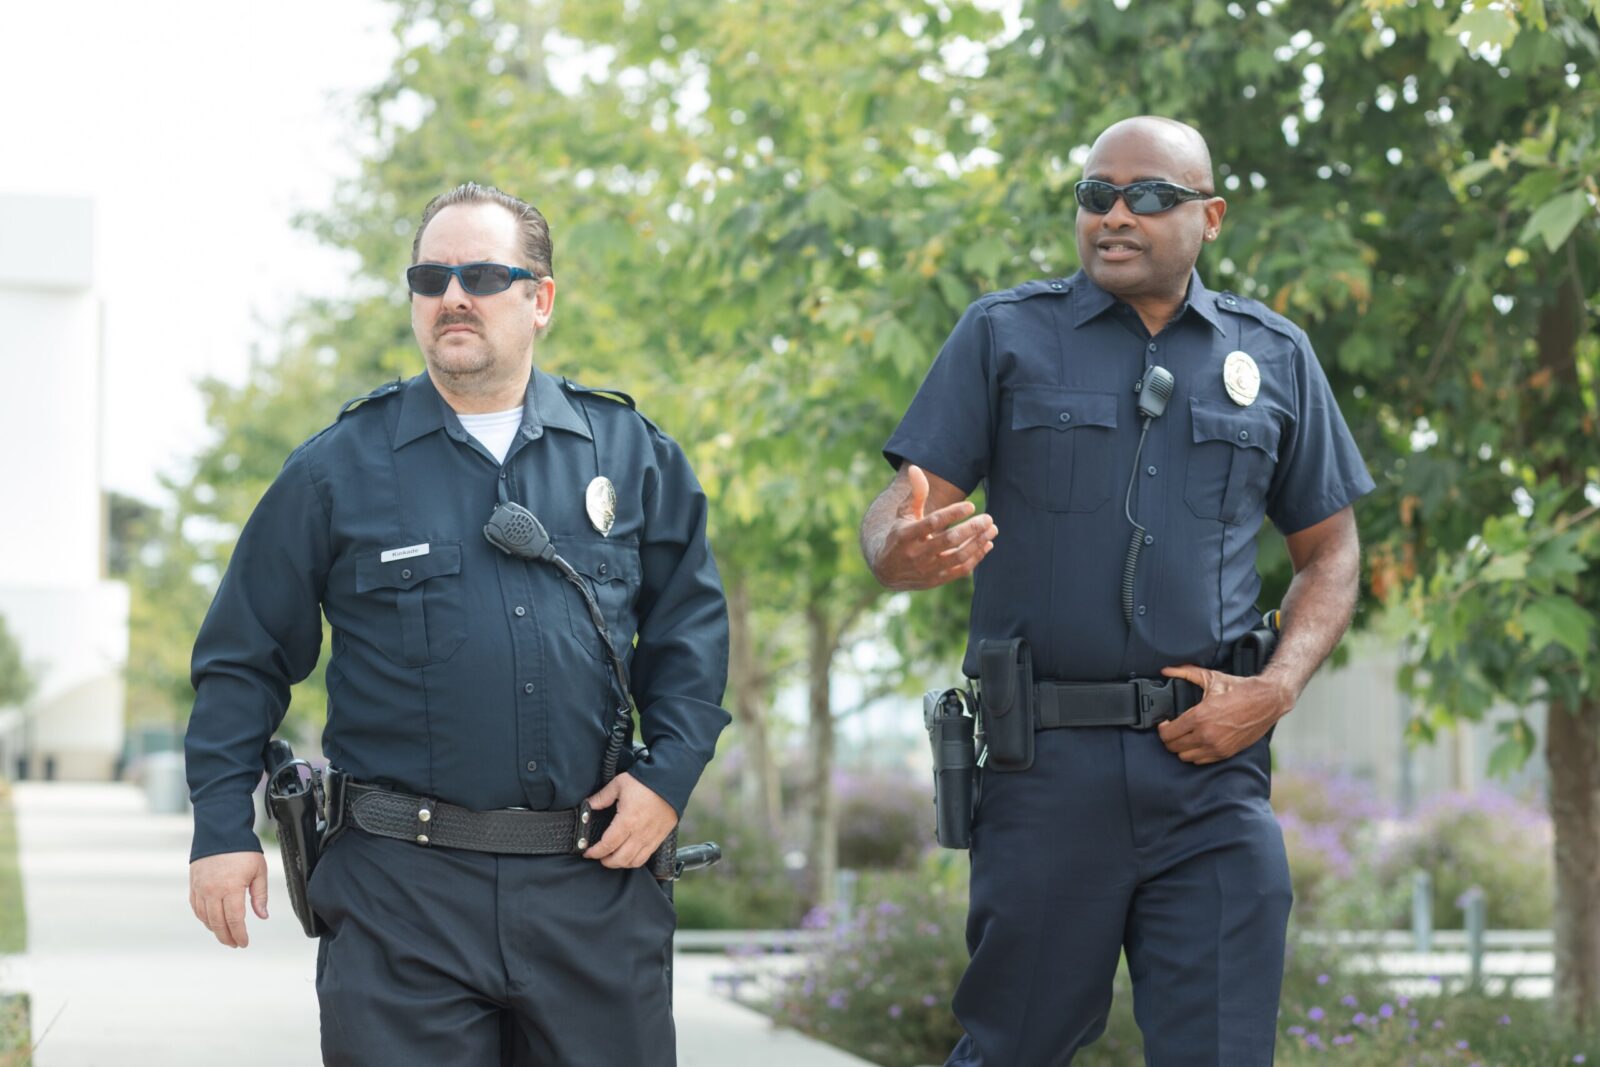 Positive Ways to Foster Teamwork between Law Enforcement Officers